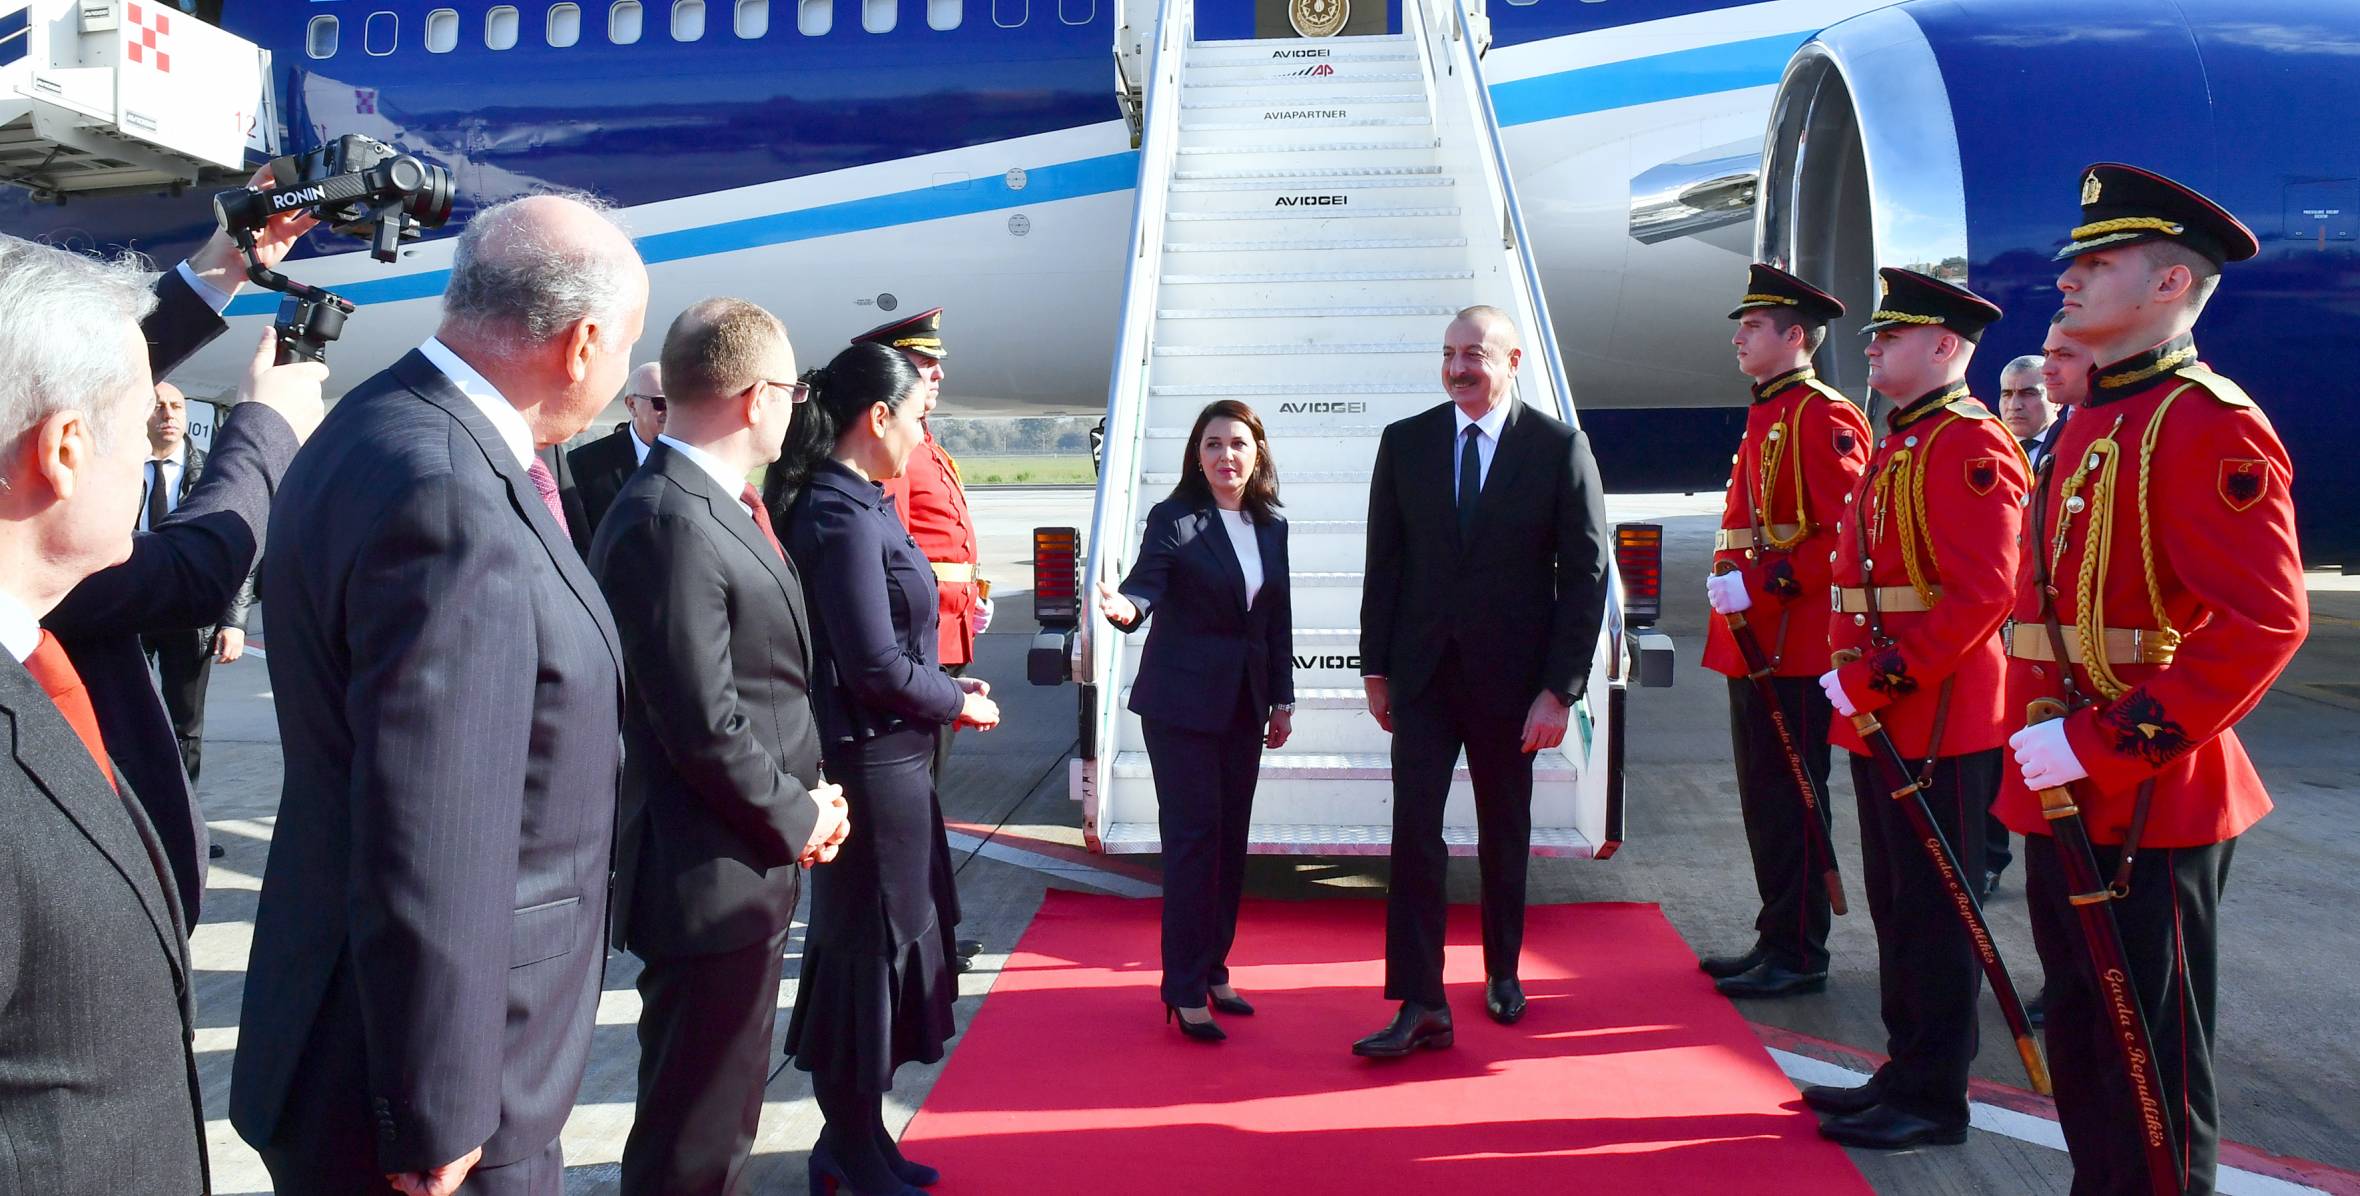 Ilham Aliyev arrived in Albania for state visit